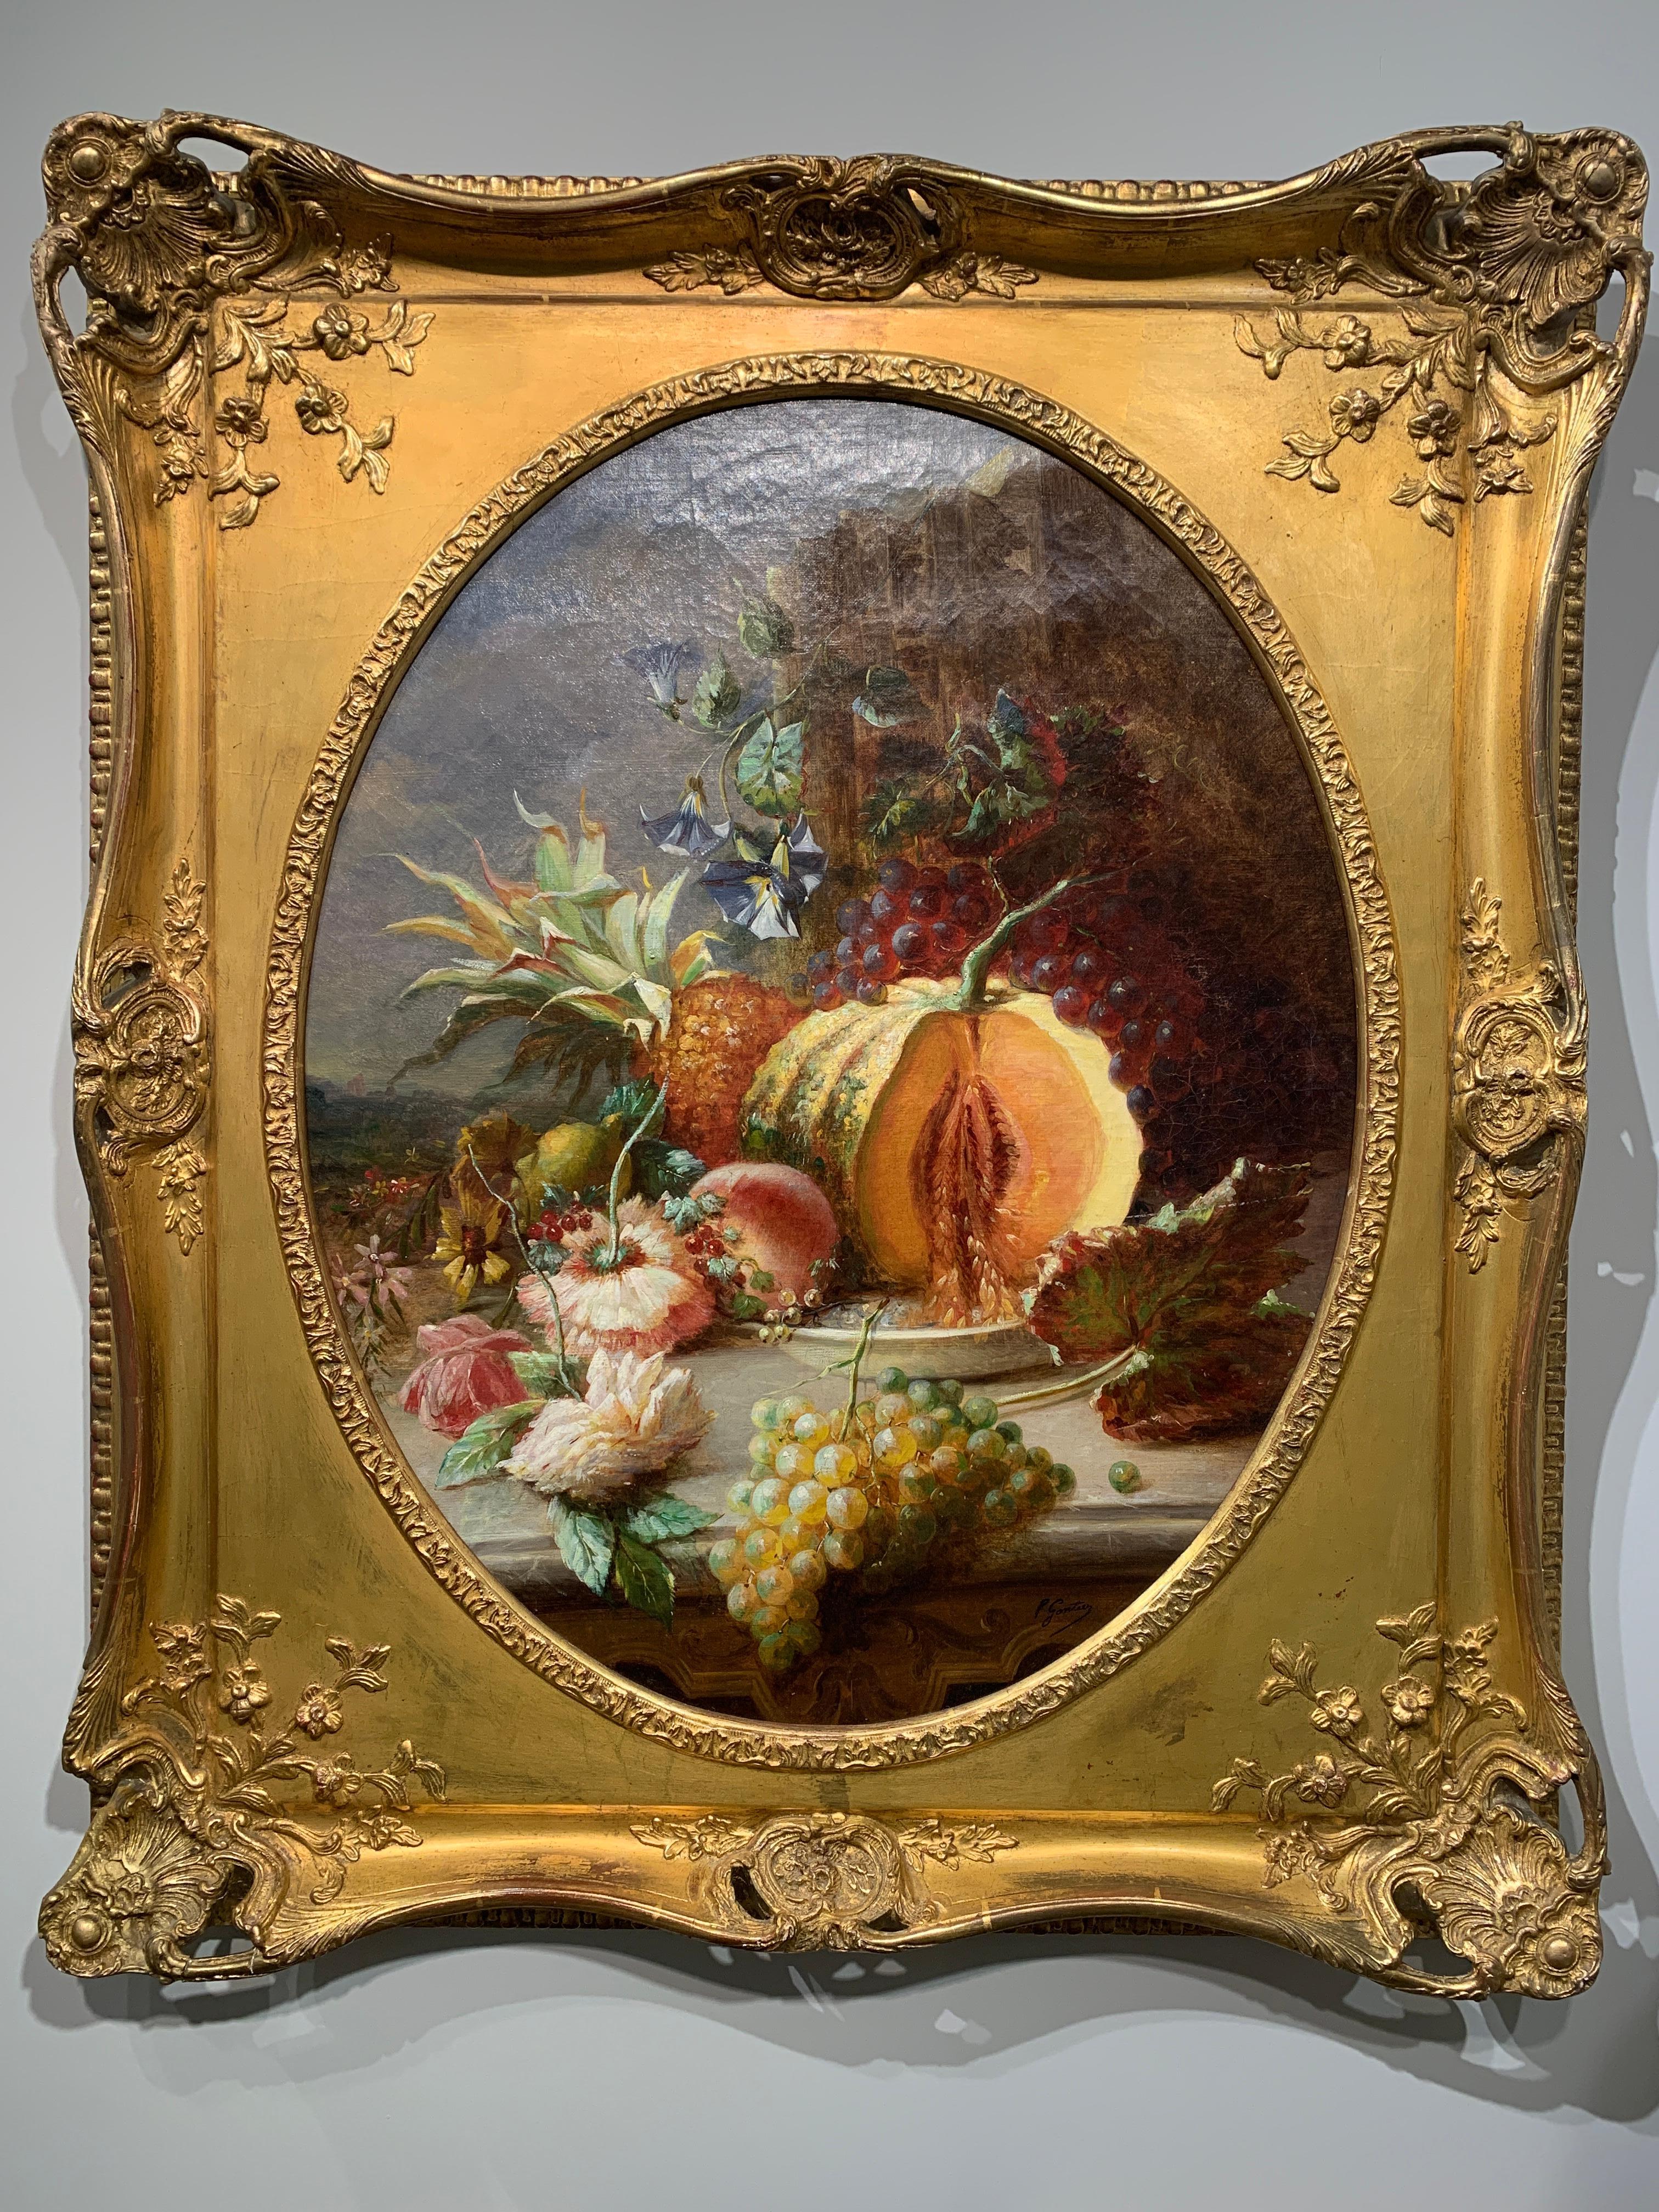 GONTIER Pierre Camille Landscape Painting - Oval French 19th century Antique still life of fruit and flowers in a landscape.